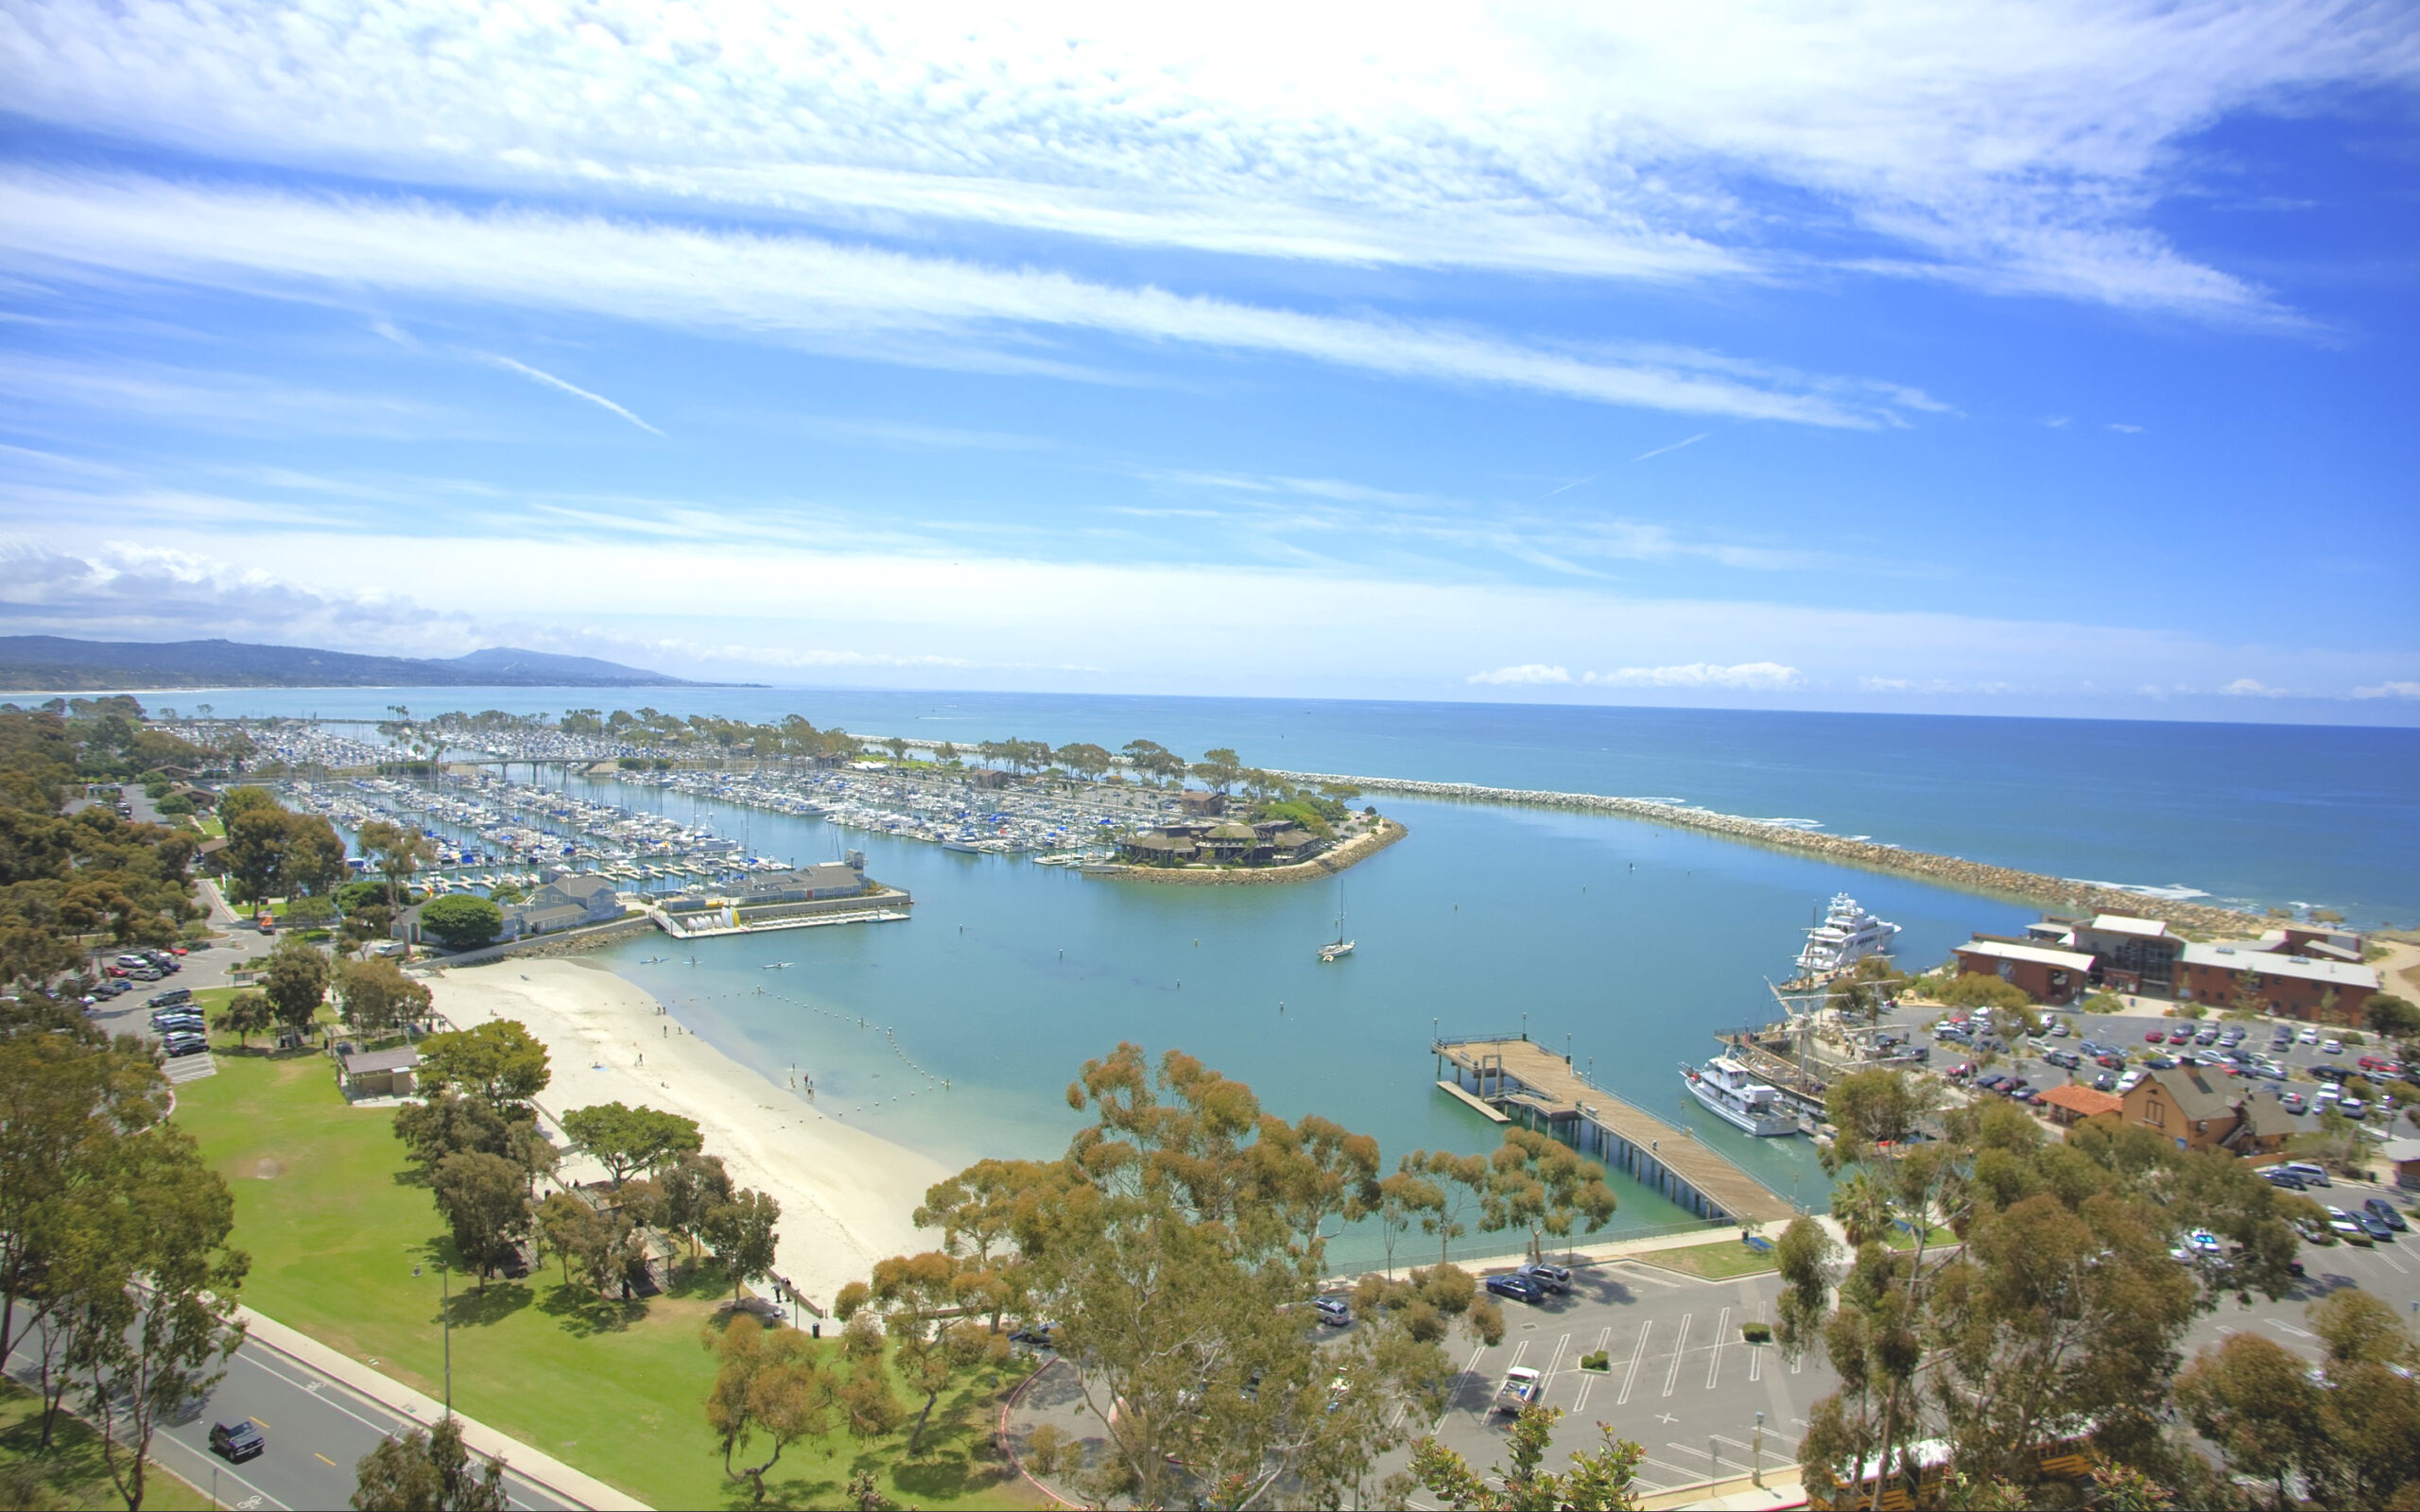 About Dana Point